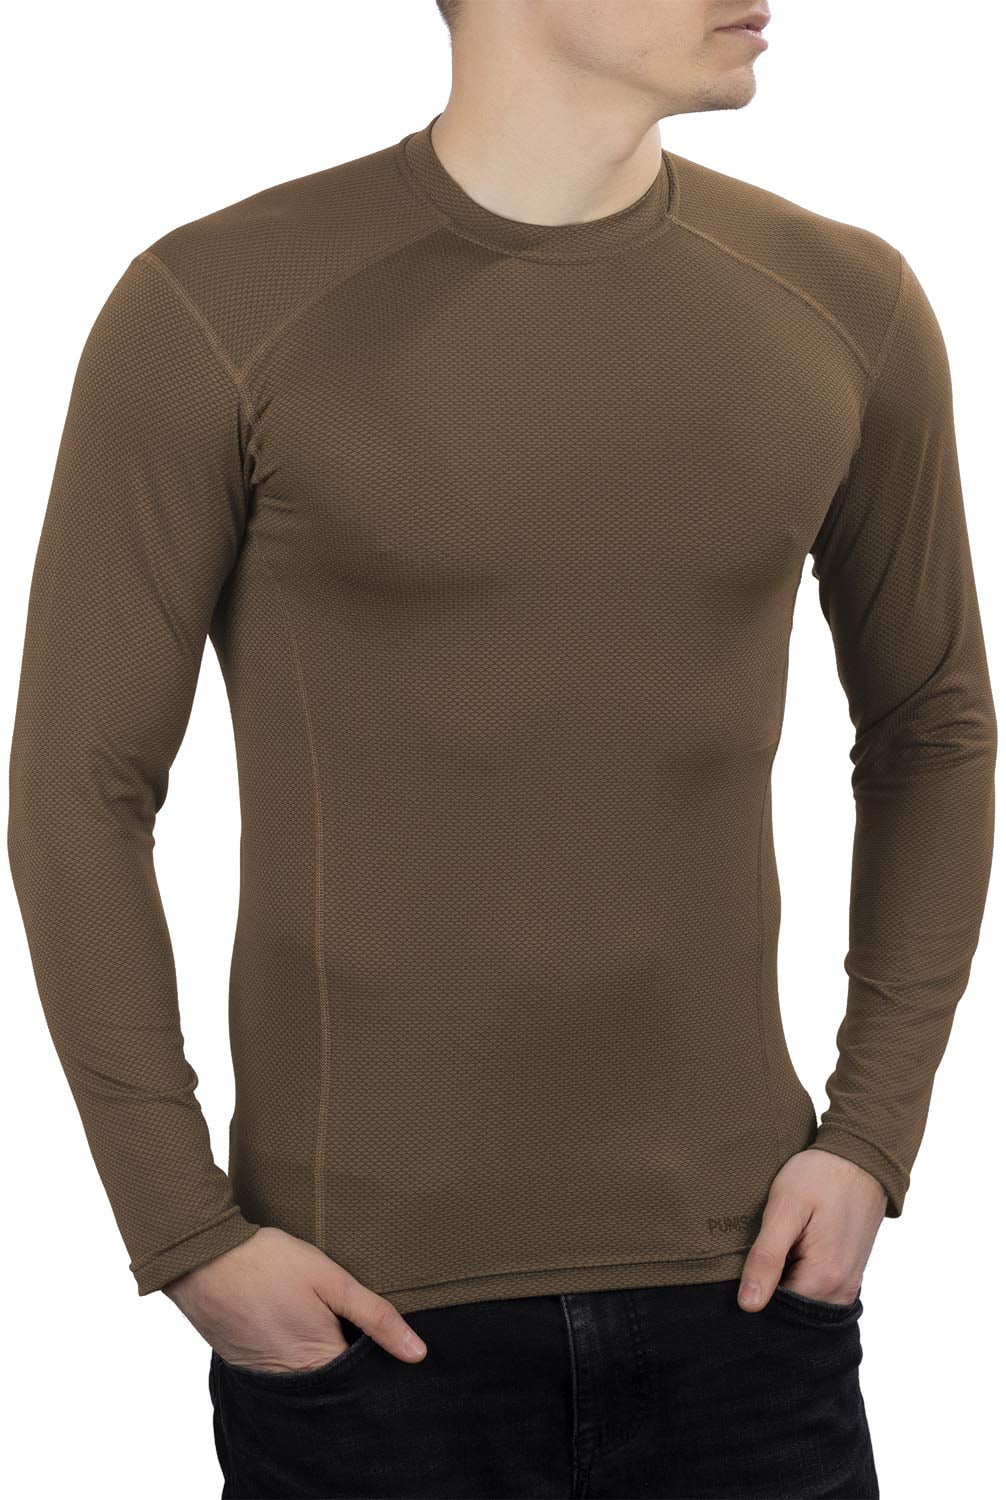 281Z Mens Military Moisture Wicking Base Layer Shirt Tactical Training  Army Professional Polartec Delta Odor Resist Cool Touch (Coyote  Brown, Large)